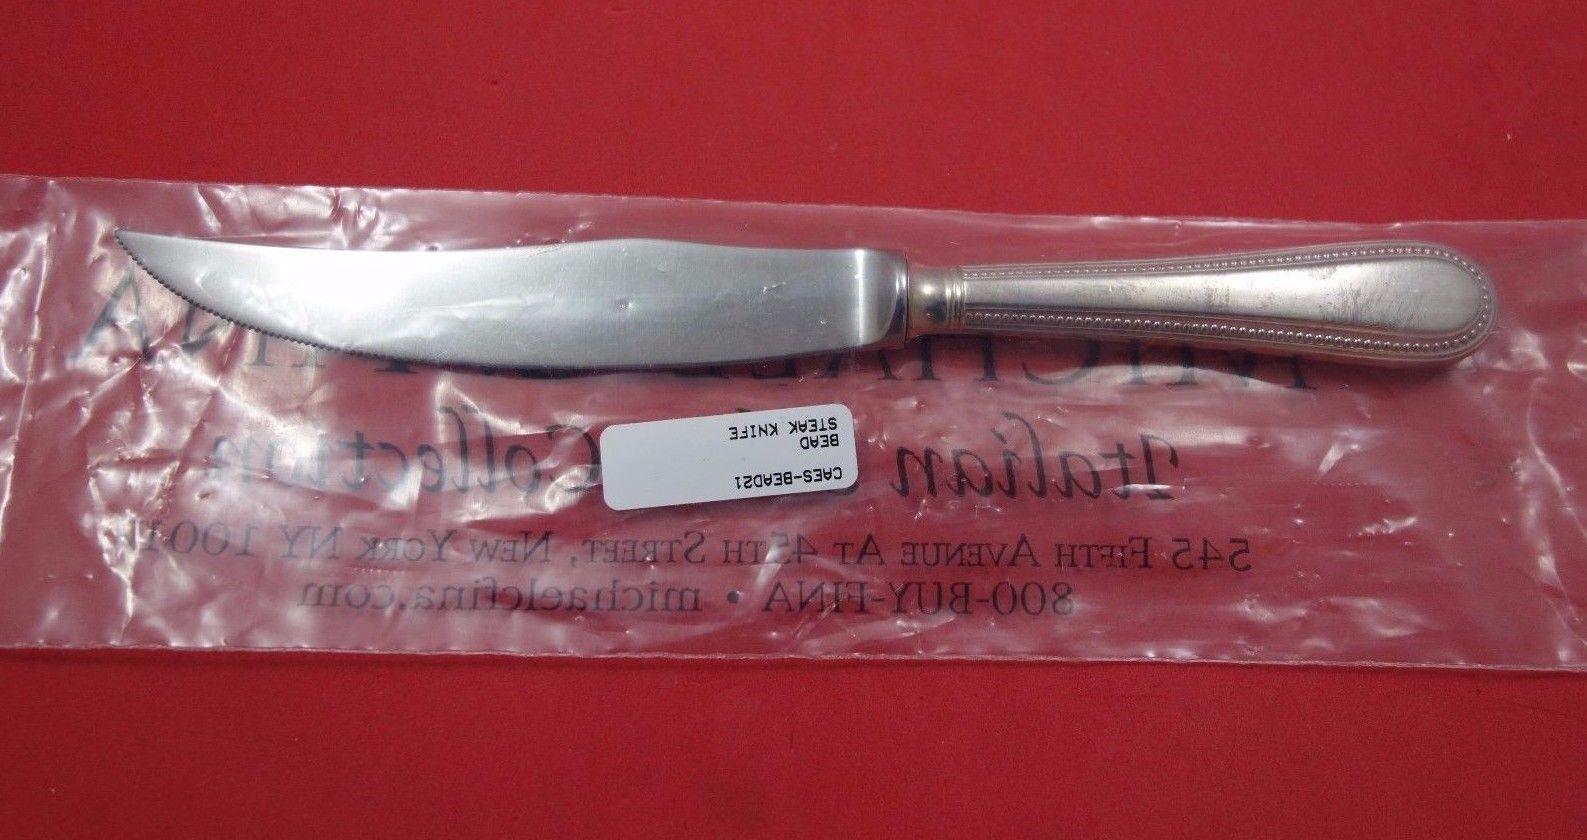 Bead Round by Carrs Sterling Silver Steak Knife Serrated 8 3/8" New - $88.11